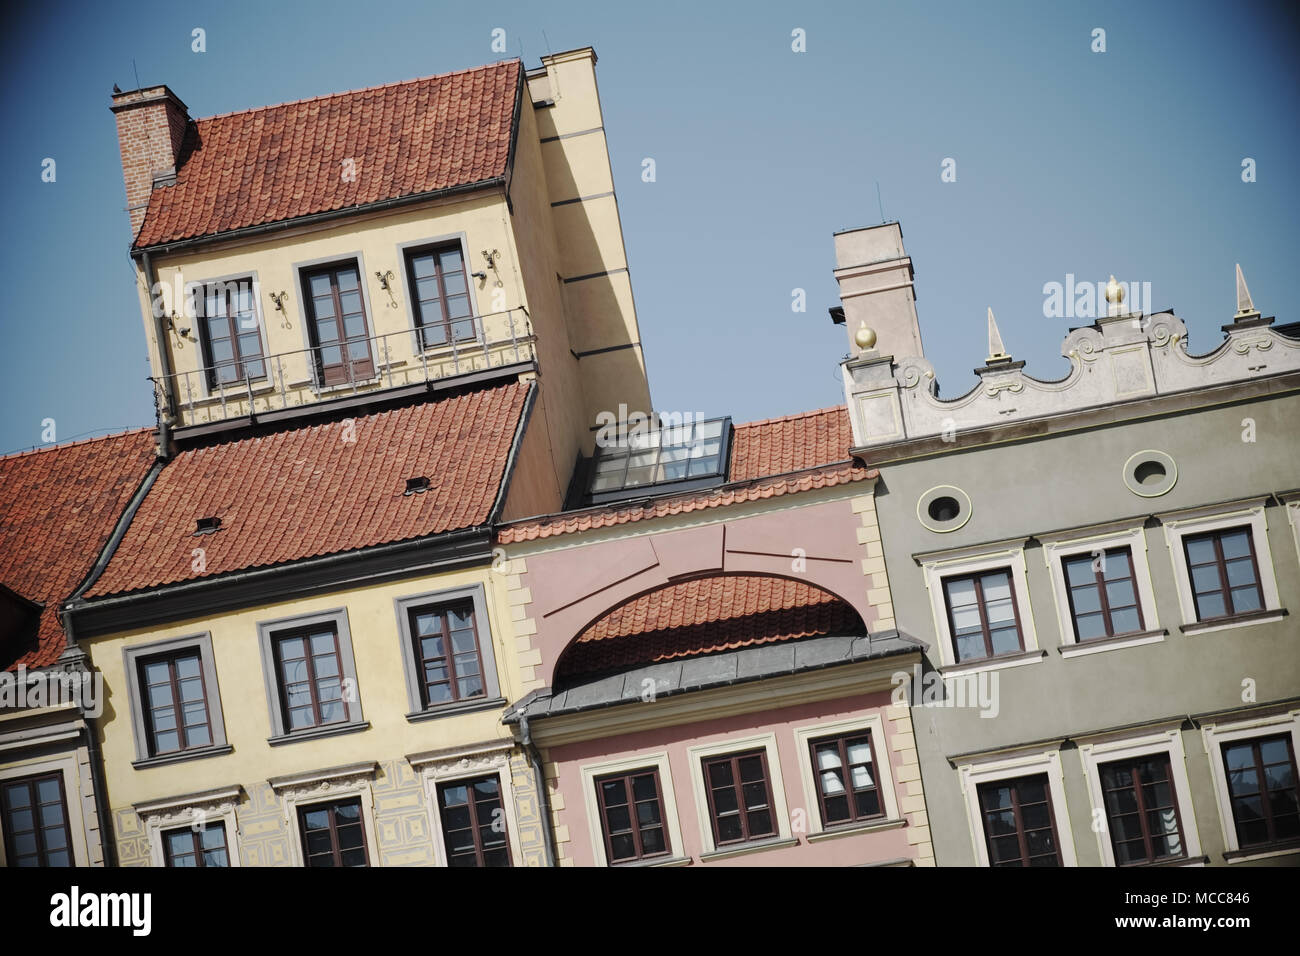 Warsaw Poland buildings and architecture in the Old Town square - Stare Miasto rynek Stock Photo